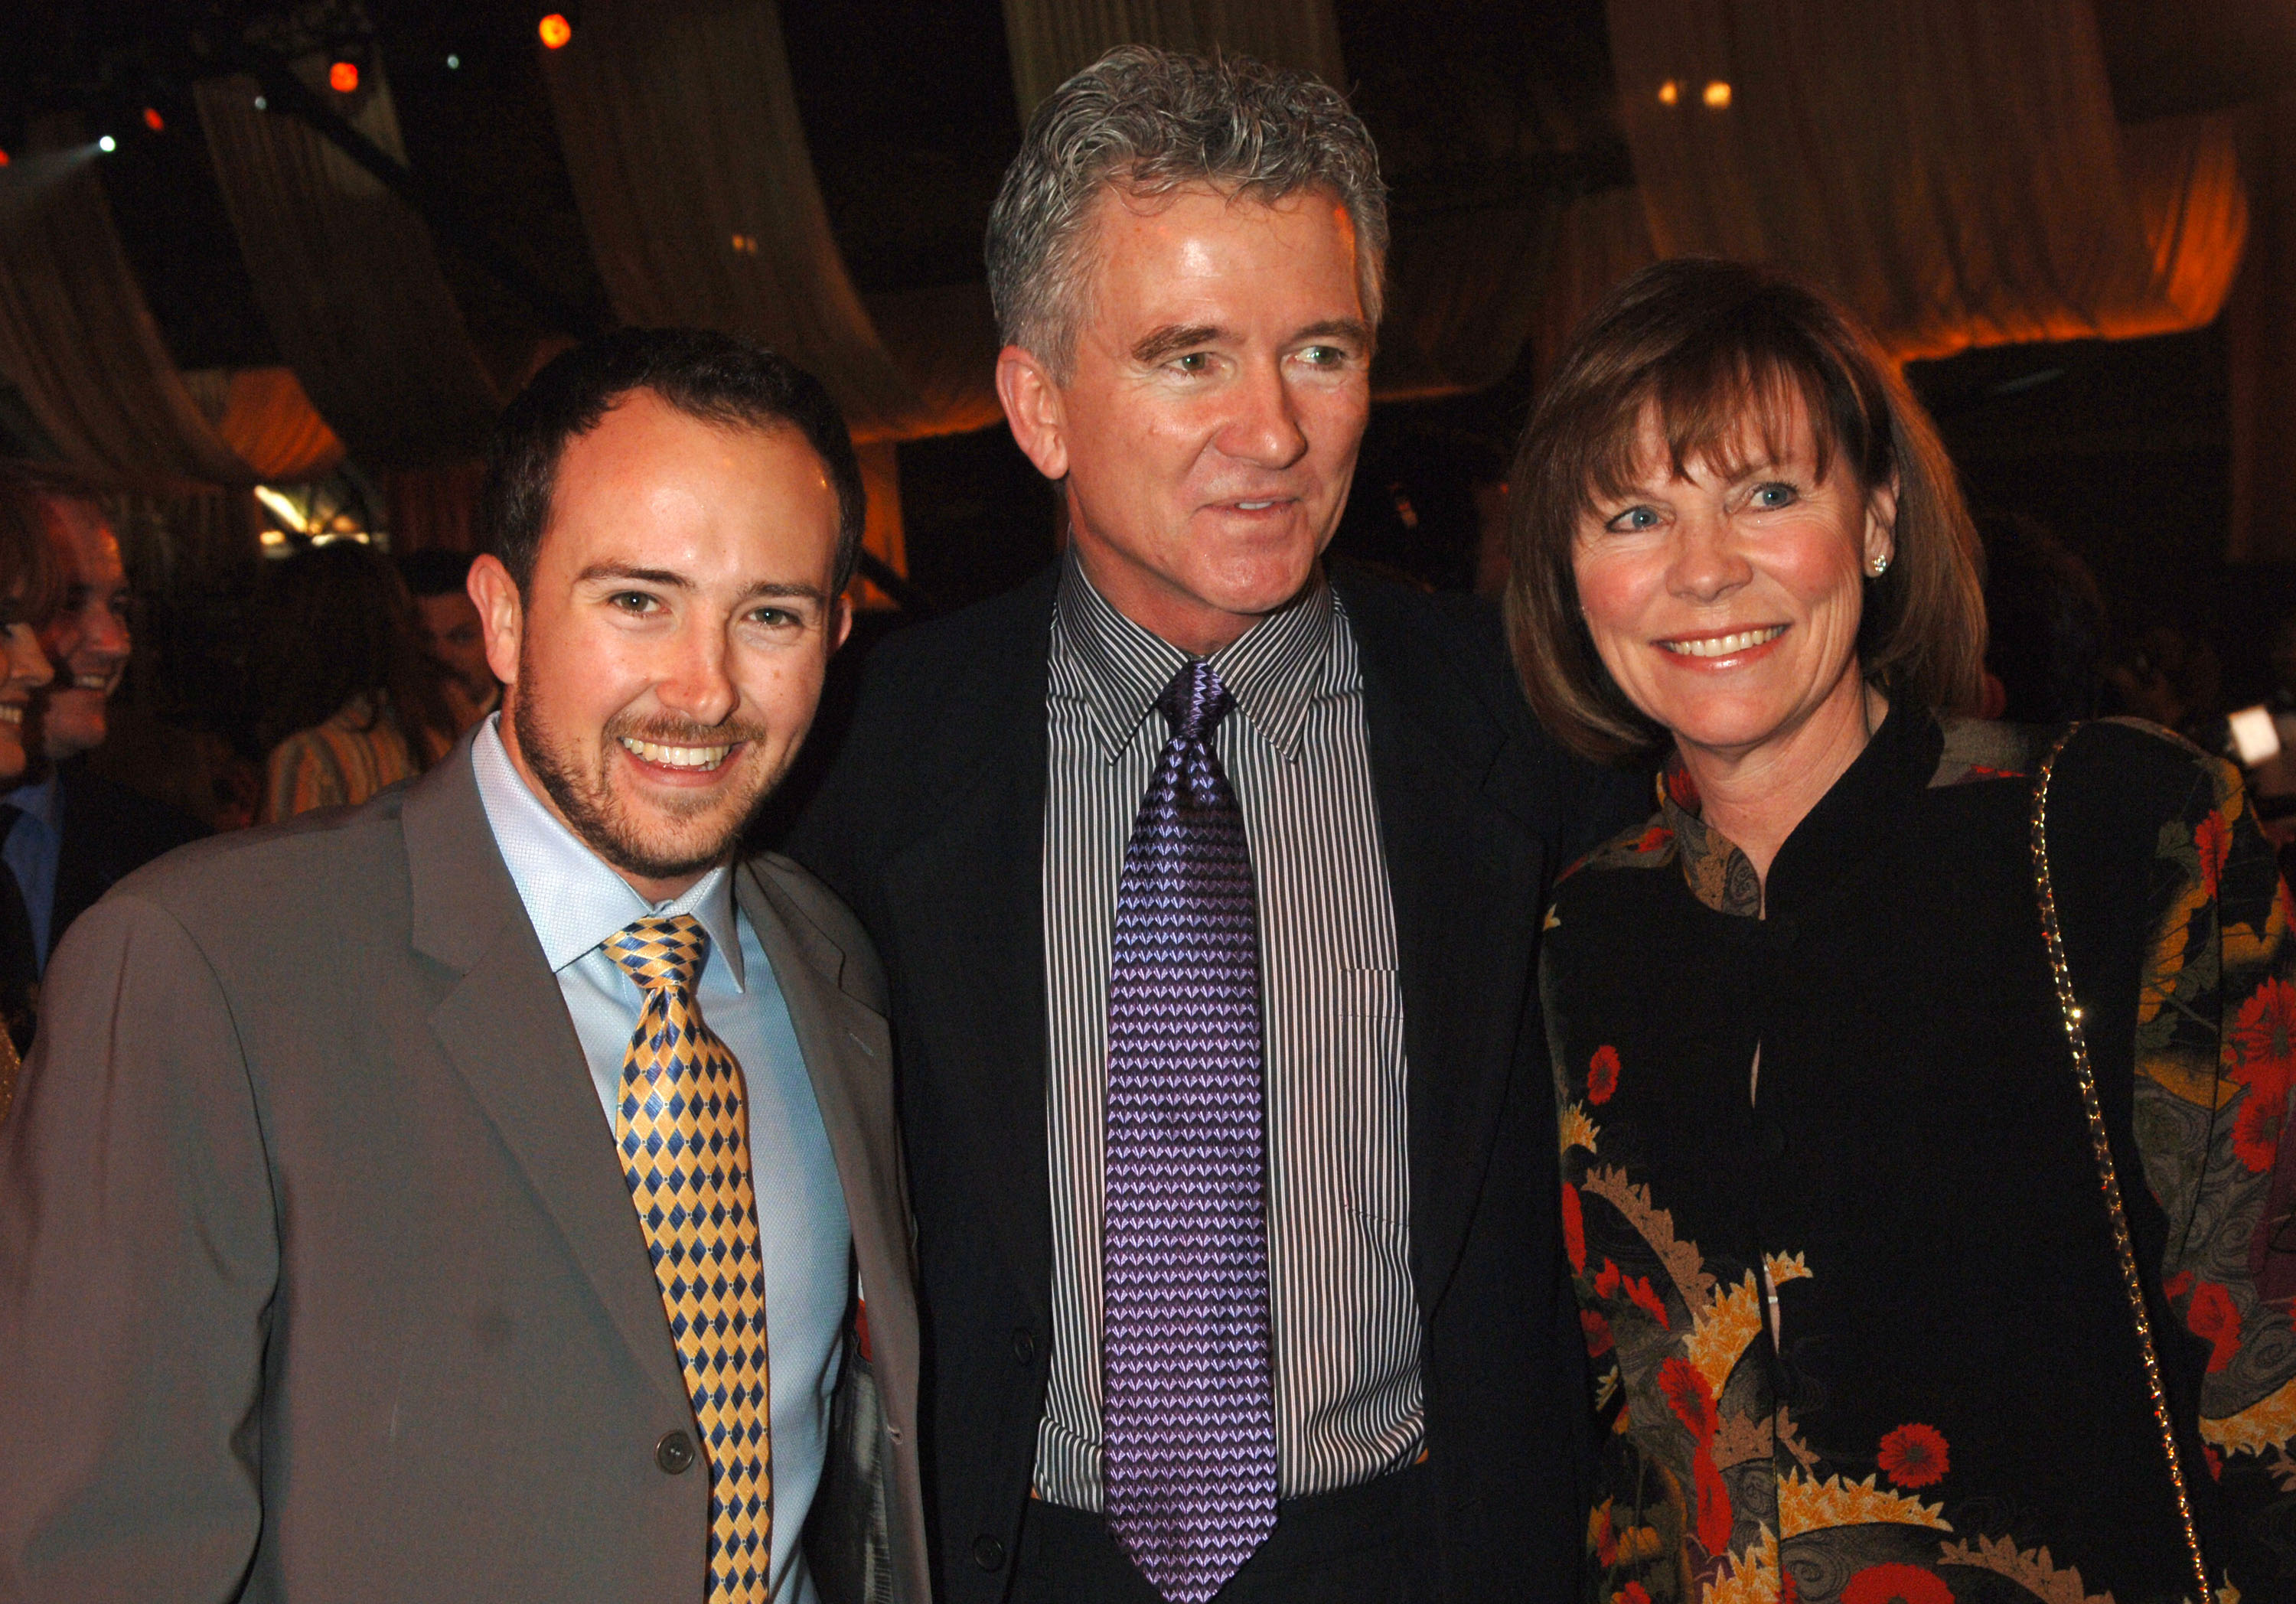 Padraic Duffy, Patrick Duffy and Carlyn Rosser Duffy at the 2006 TV Land Awards. | Source: Getty Images